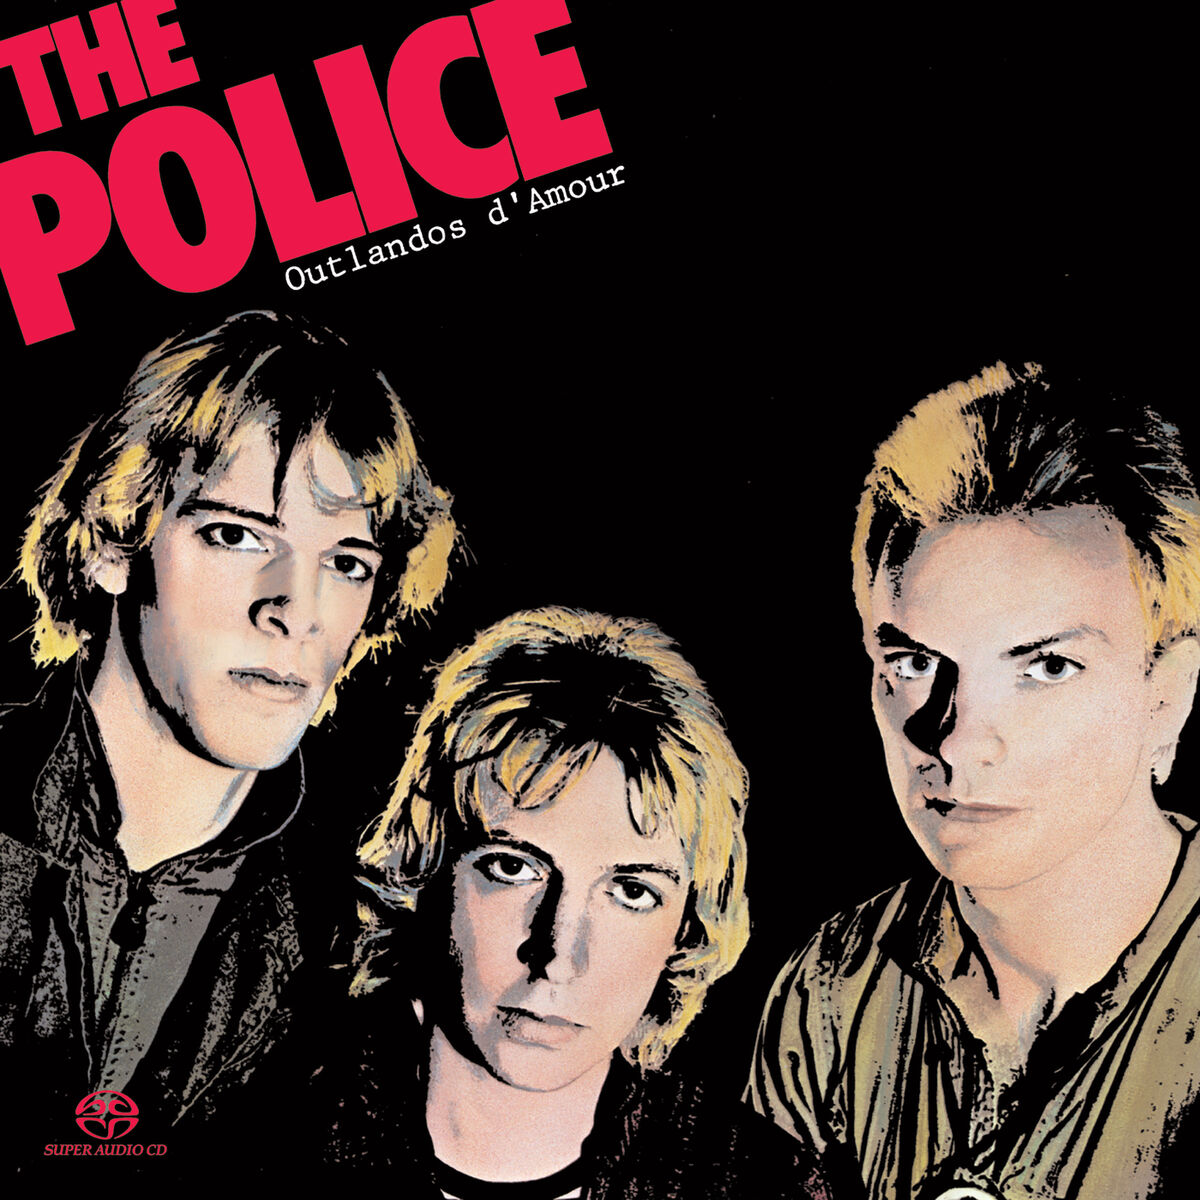 The Police - Synchronicity (Remastered 2003): lyrics and songs | Deezer